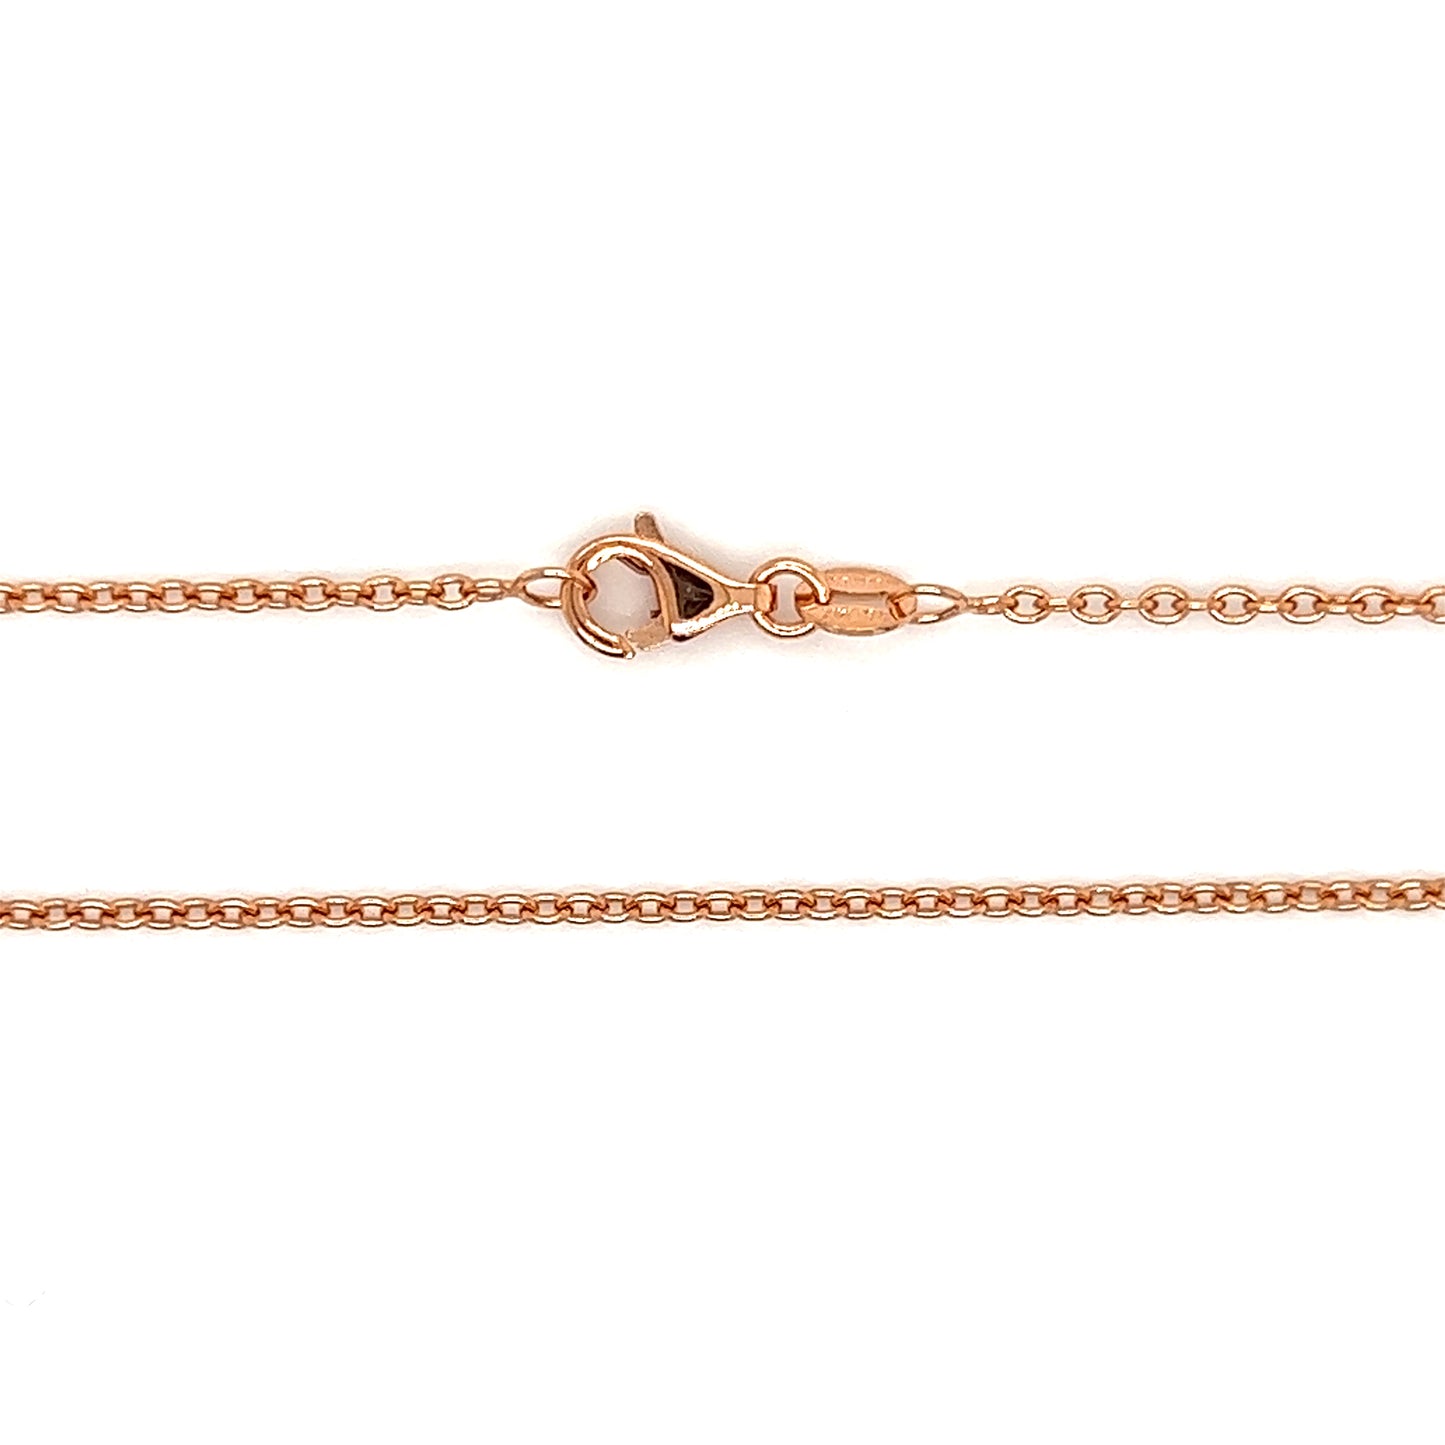 Cable Chain 1.5mm with Adjustable Length in 14K Rose Gold Chain and Lobster Clasp View